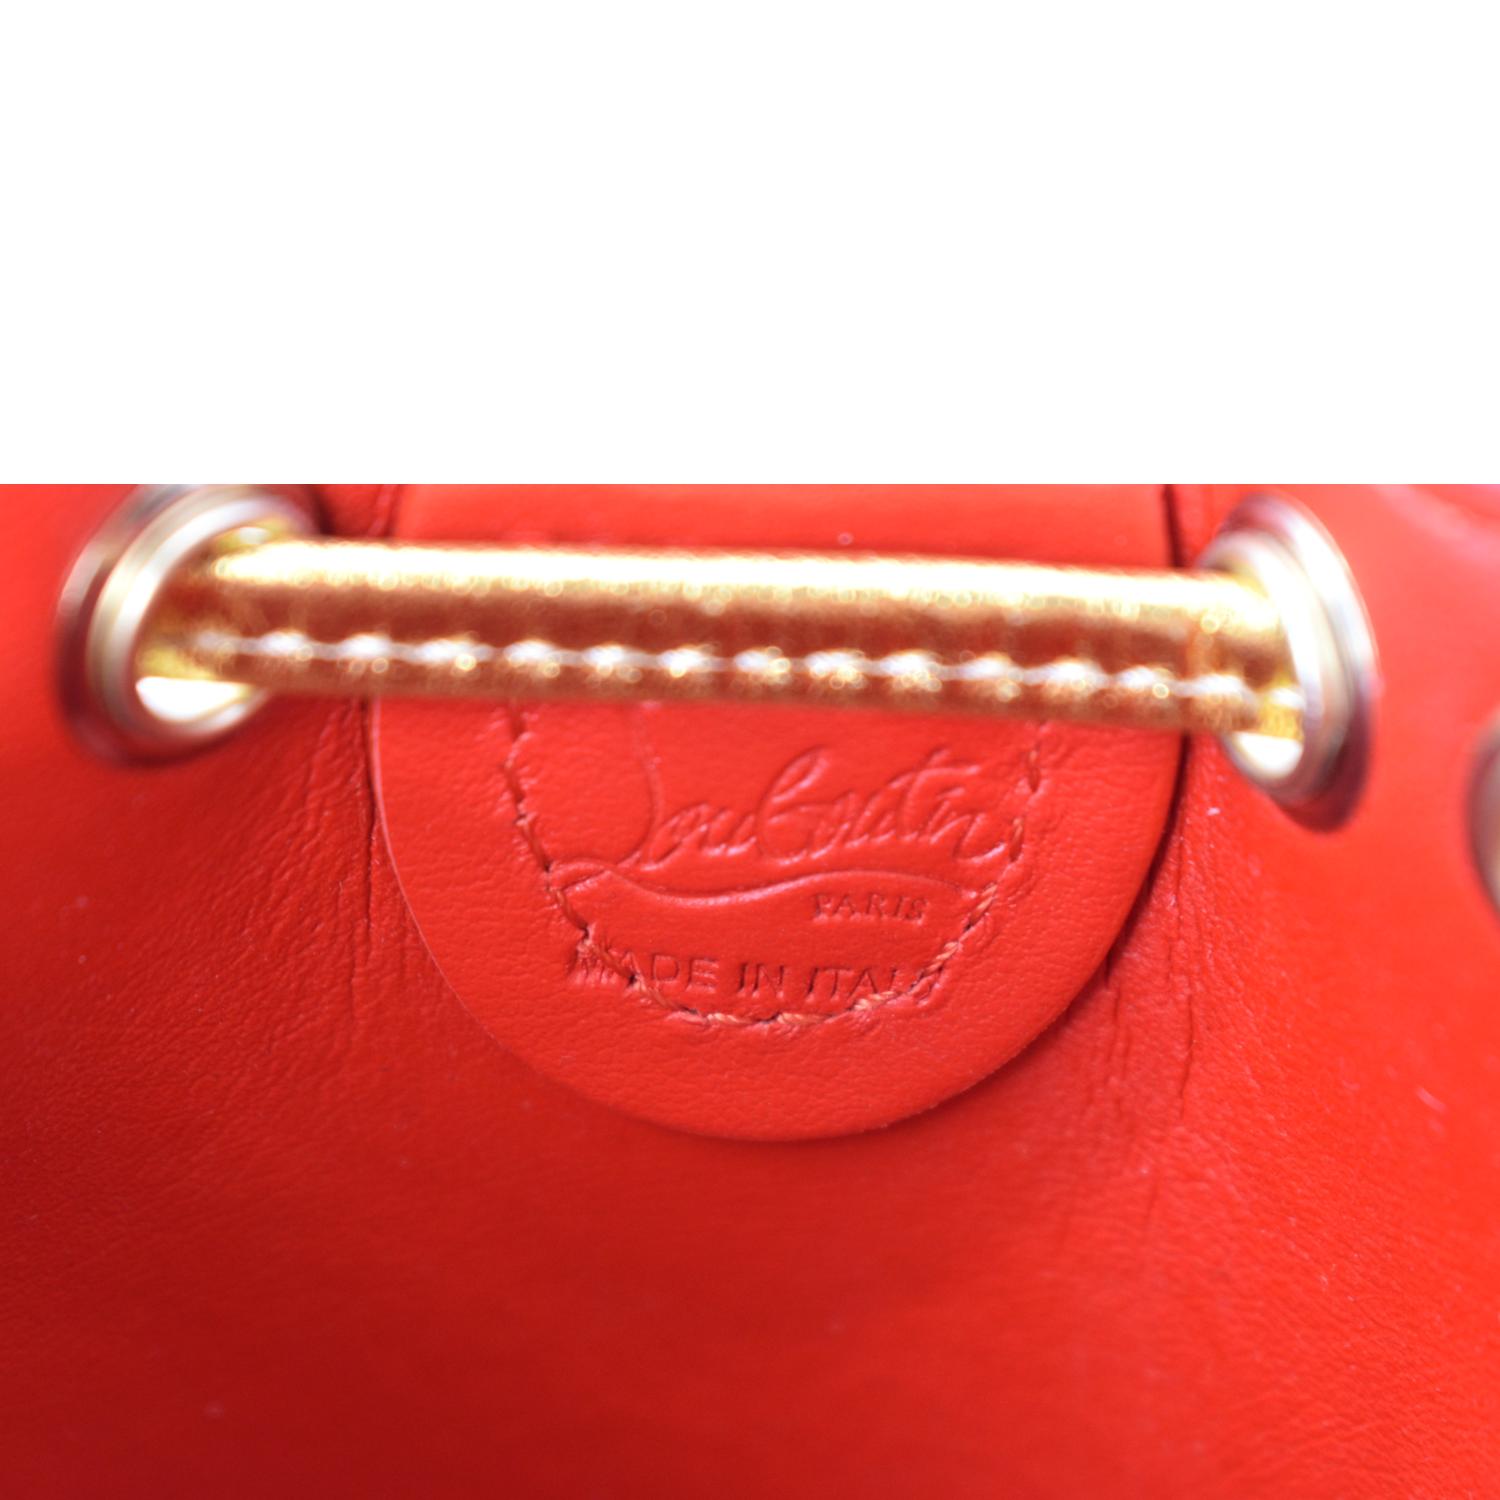 Marie jane leather handbag Christian Louboutin Gold in Leather